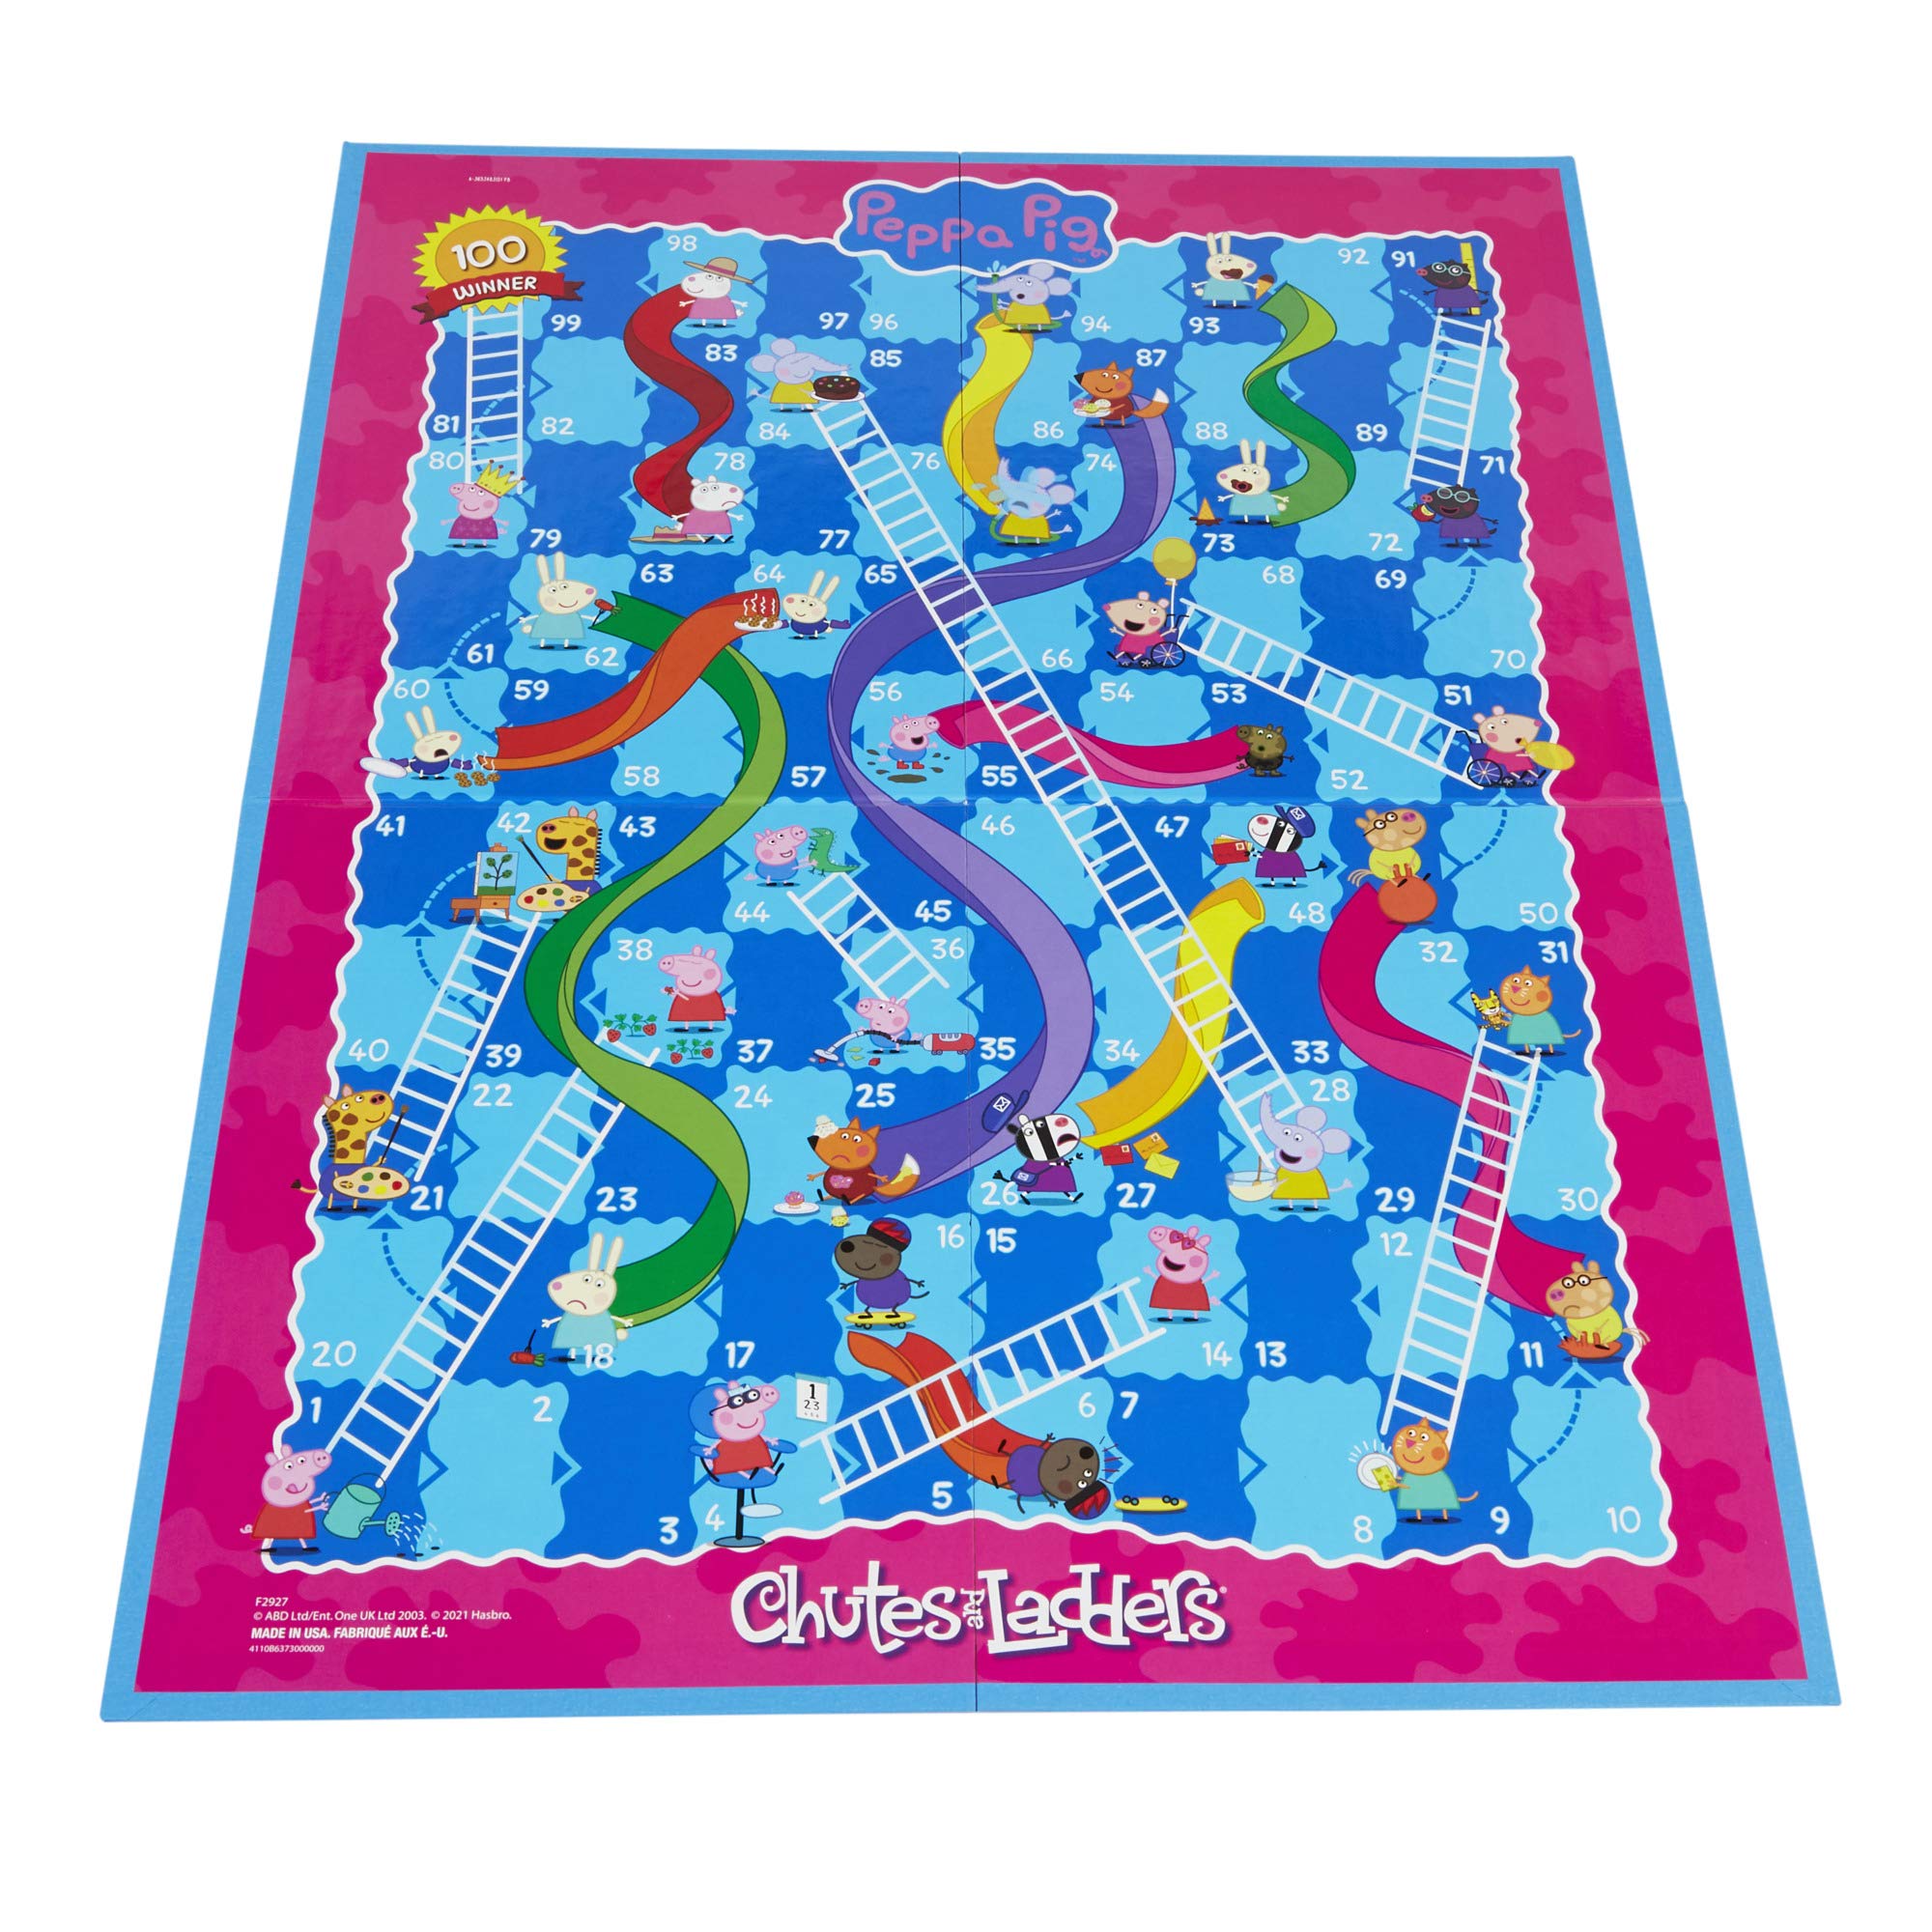 Chutes and Ladders: Peppa Pig Edition Board Game for Kids Ages 3 and Up, Preschool Games for 2-4 Players